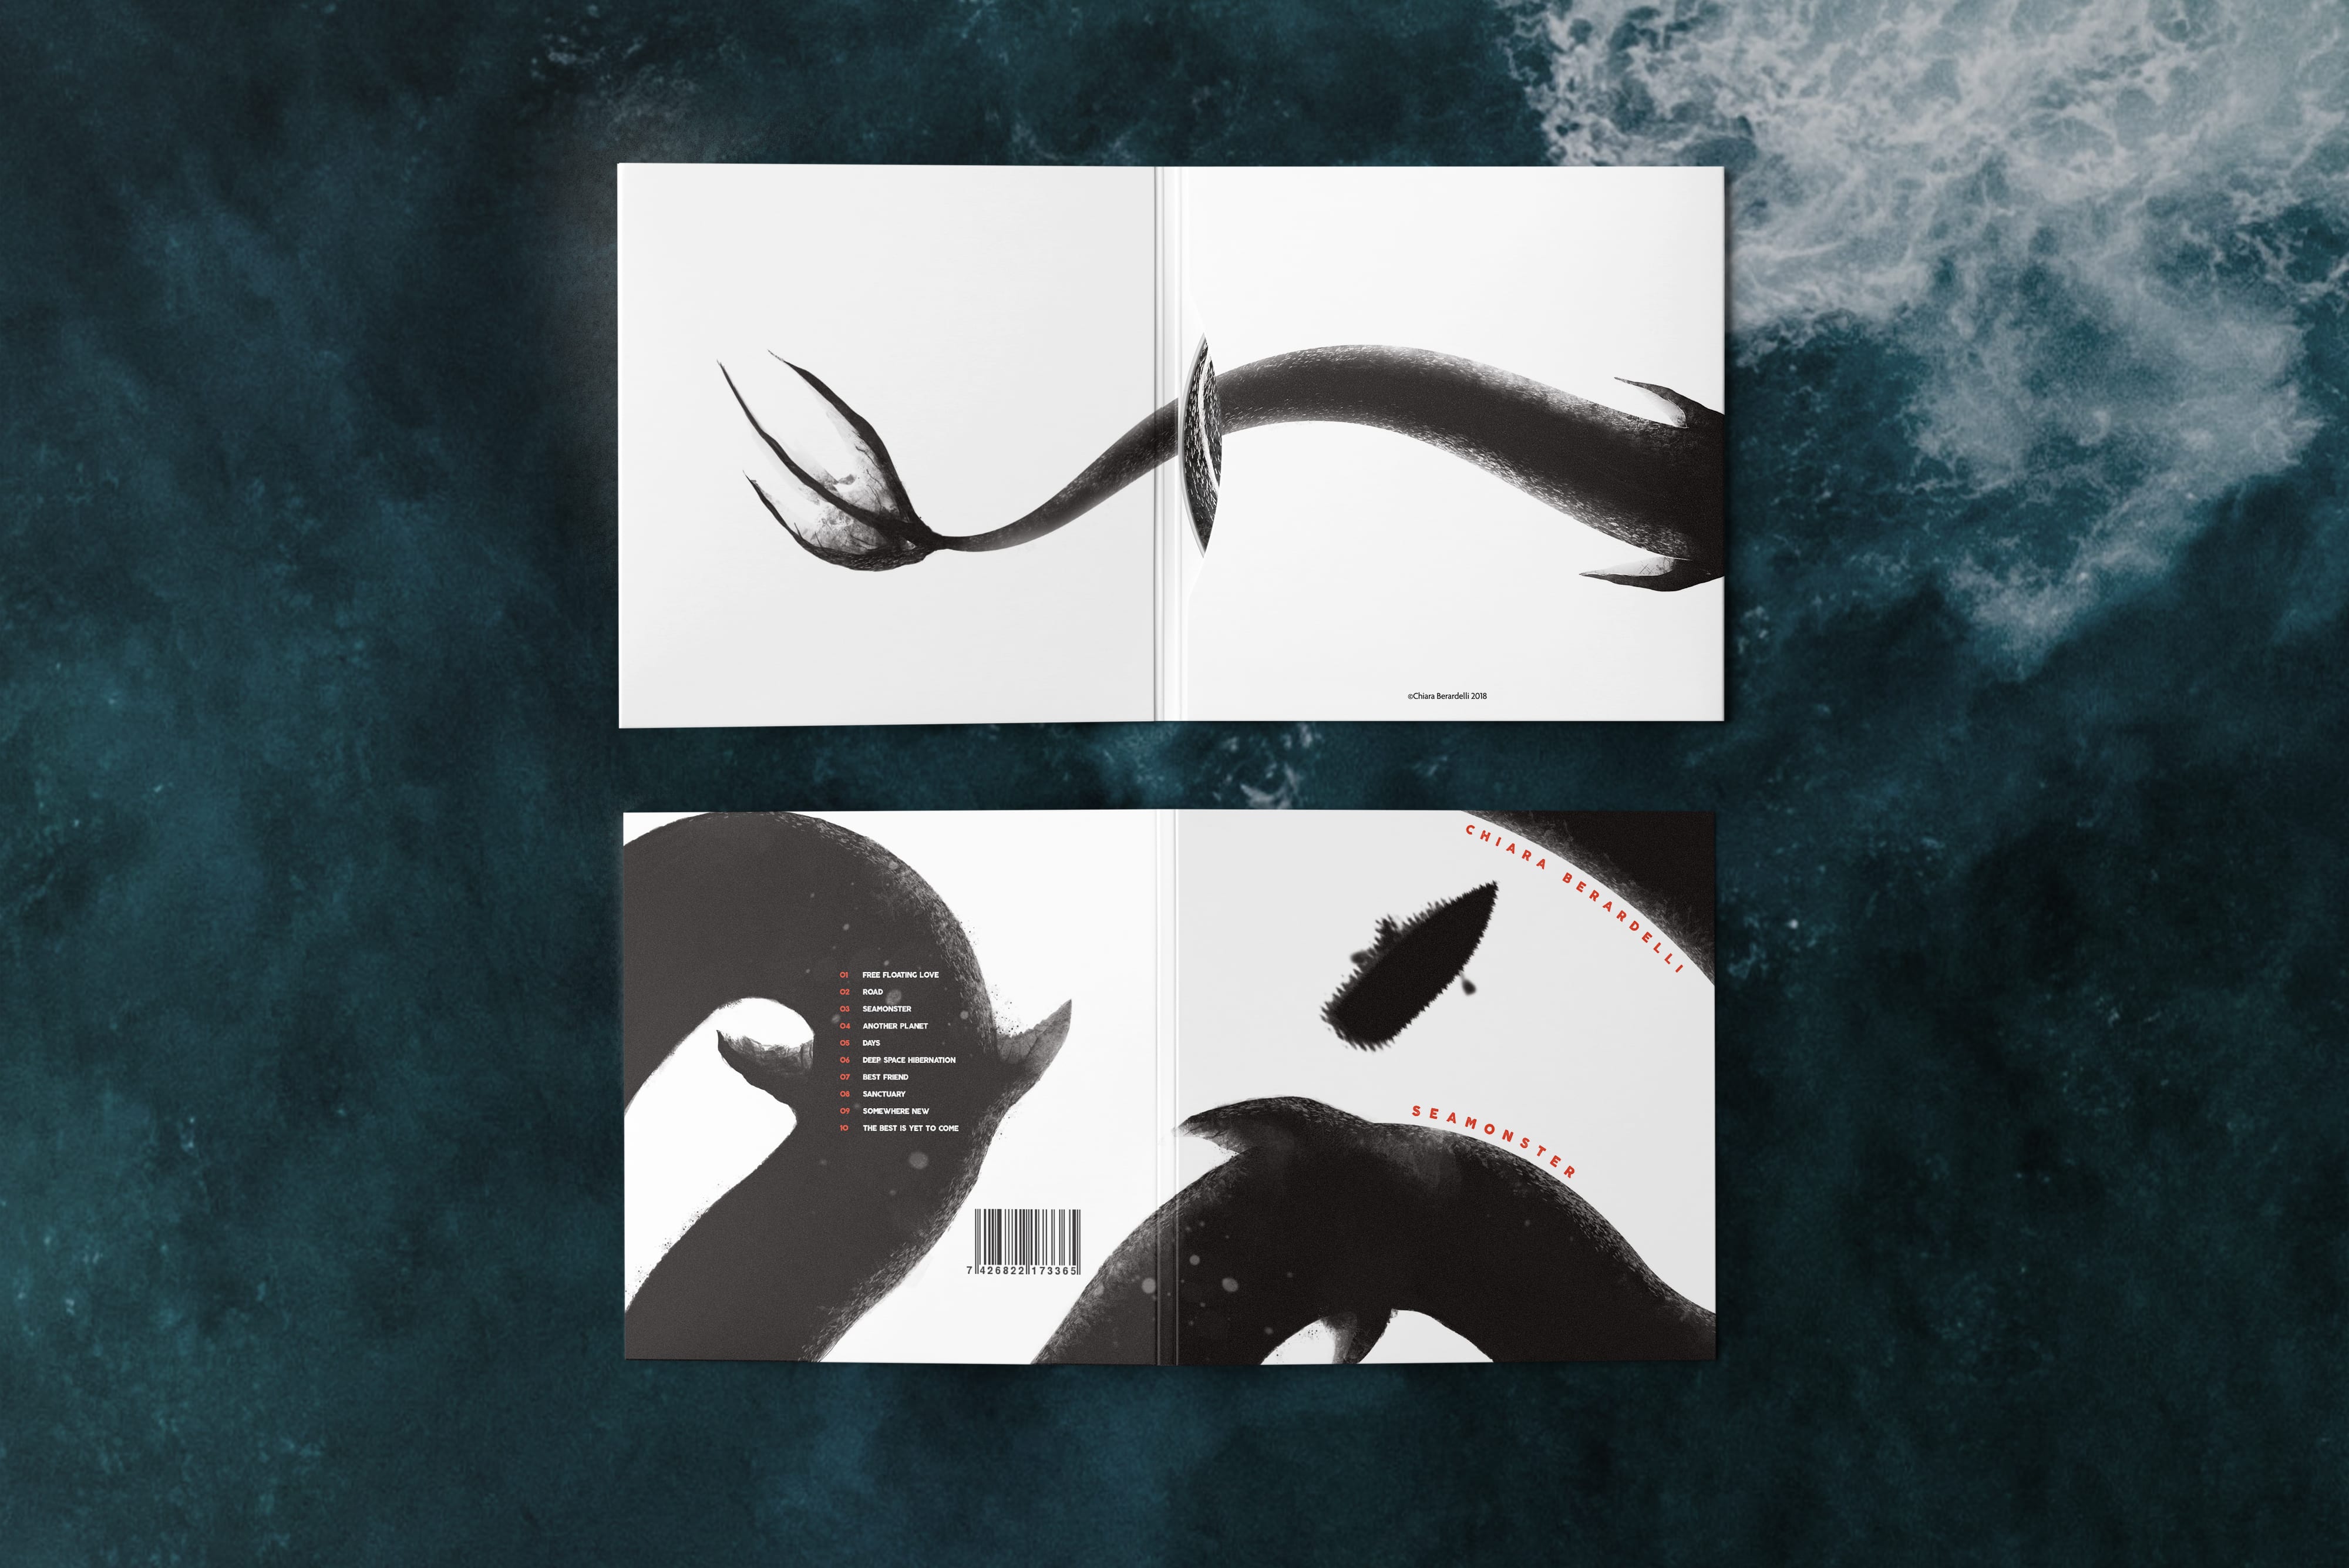 Seamonster Album Artwork sleeve showing external artwork and then continued Sea Serpant Tail inside